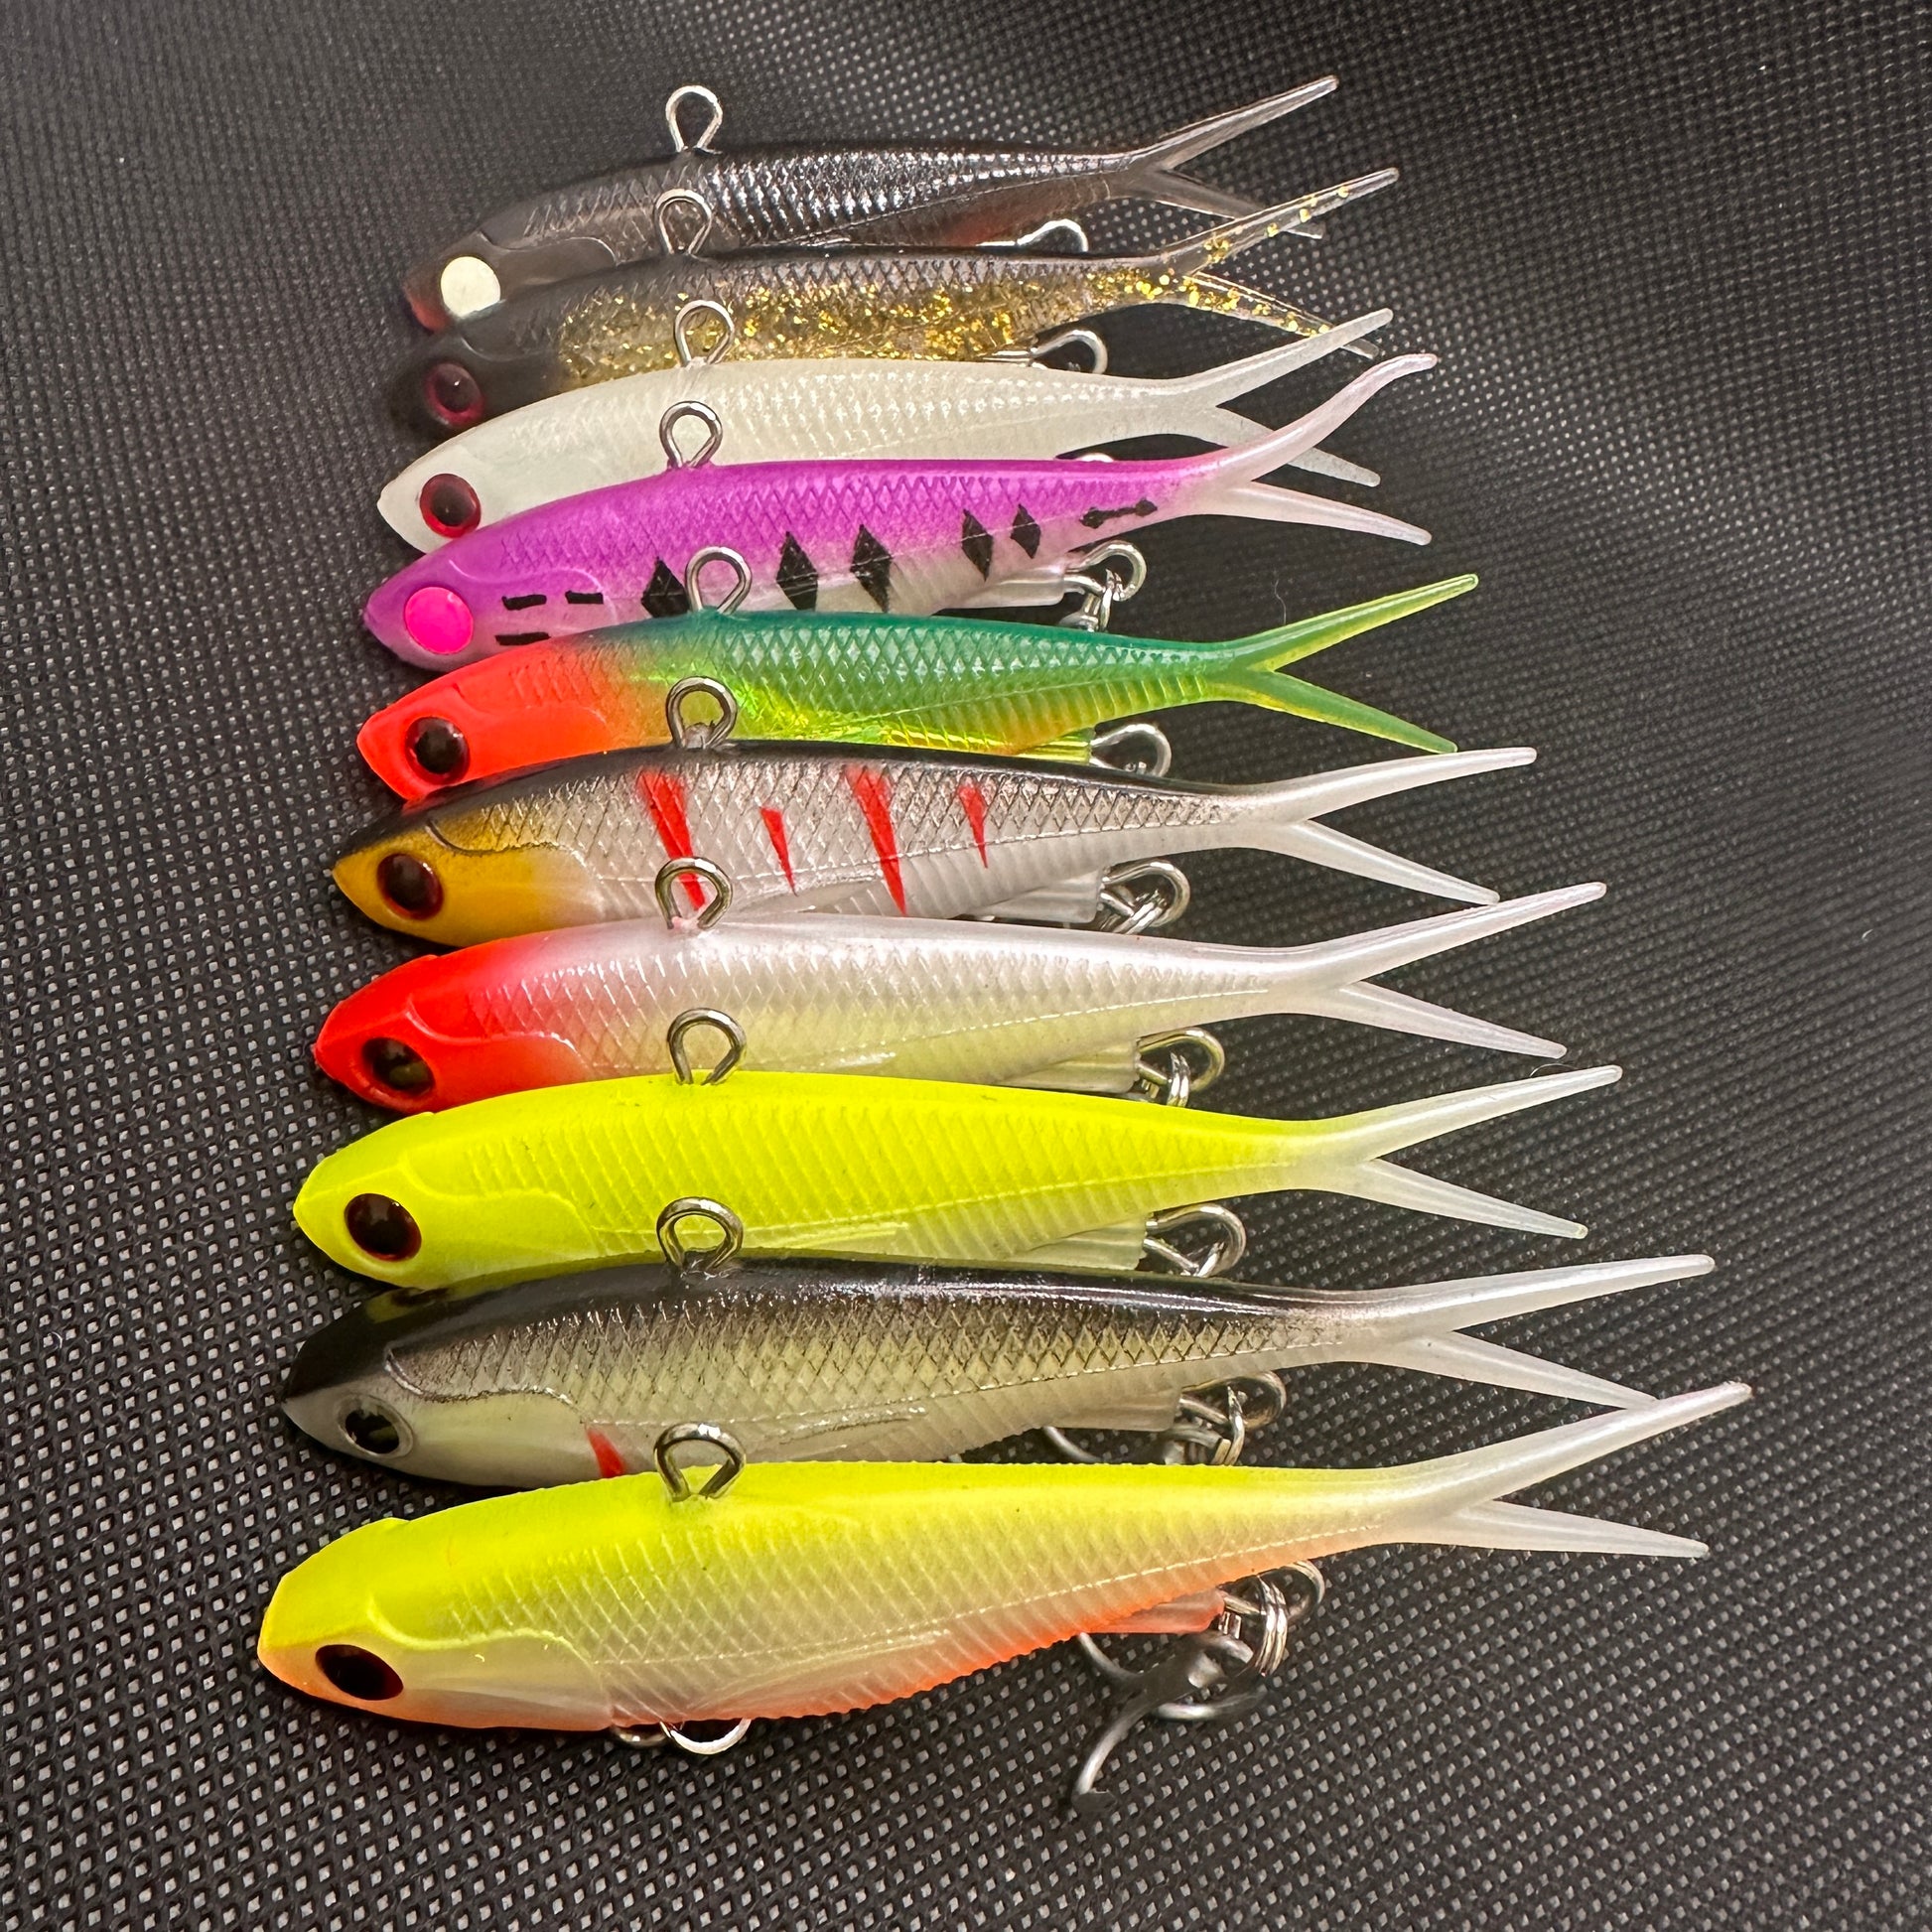 Reel Action Lures